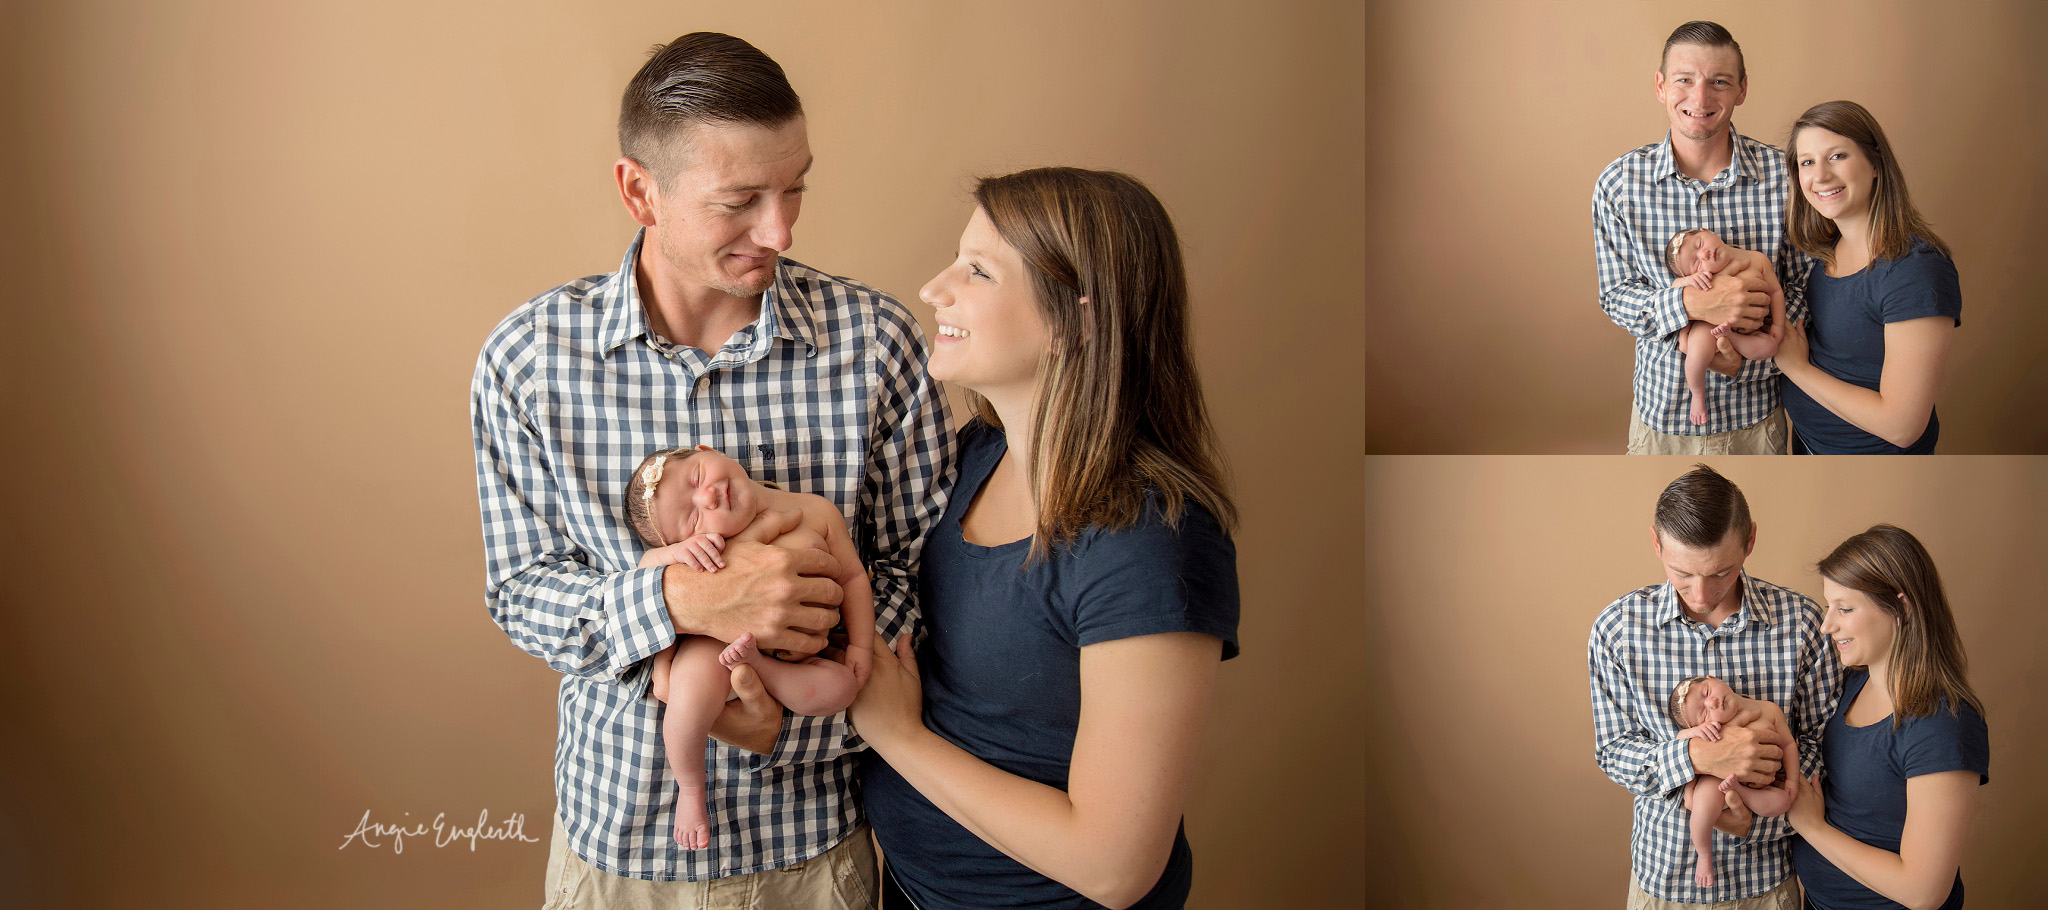 lancaster_newborn_and_maternity_photographer_angie_englerth_central_pa_b046.jpg